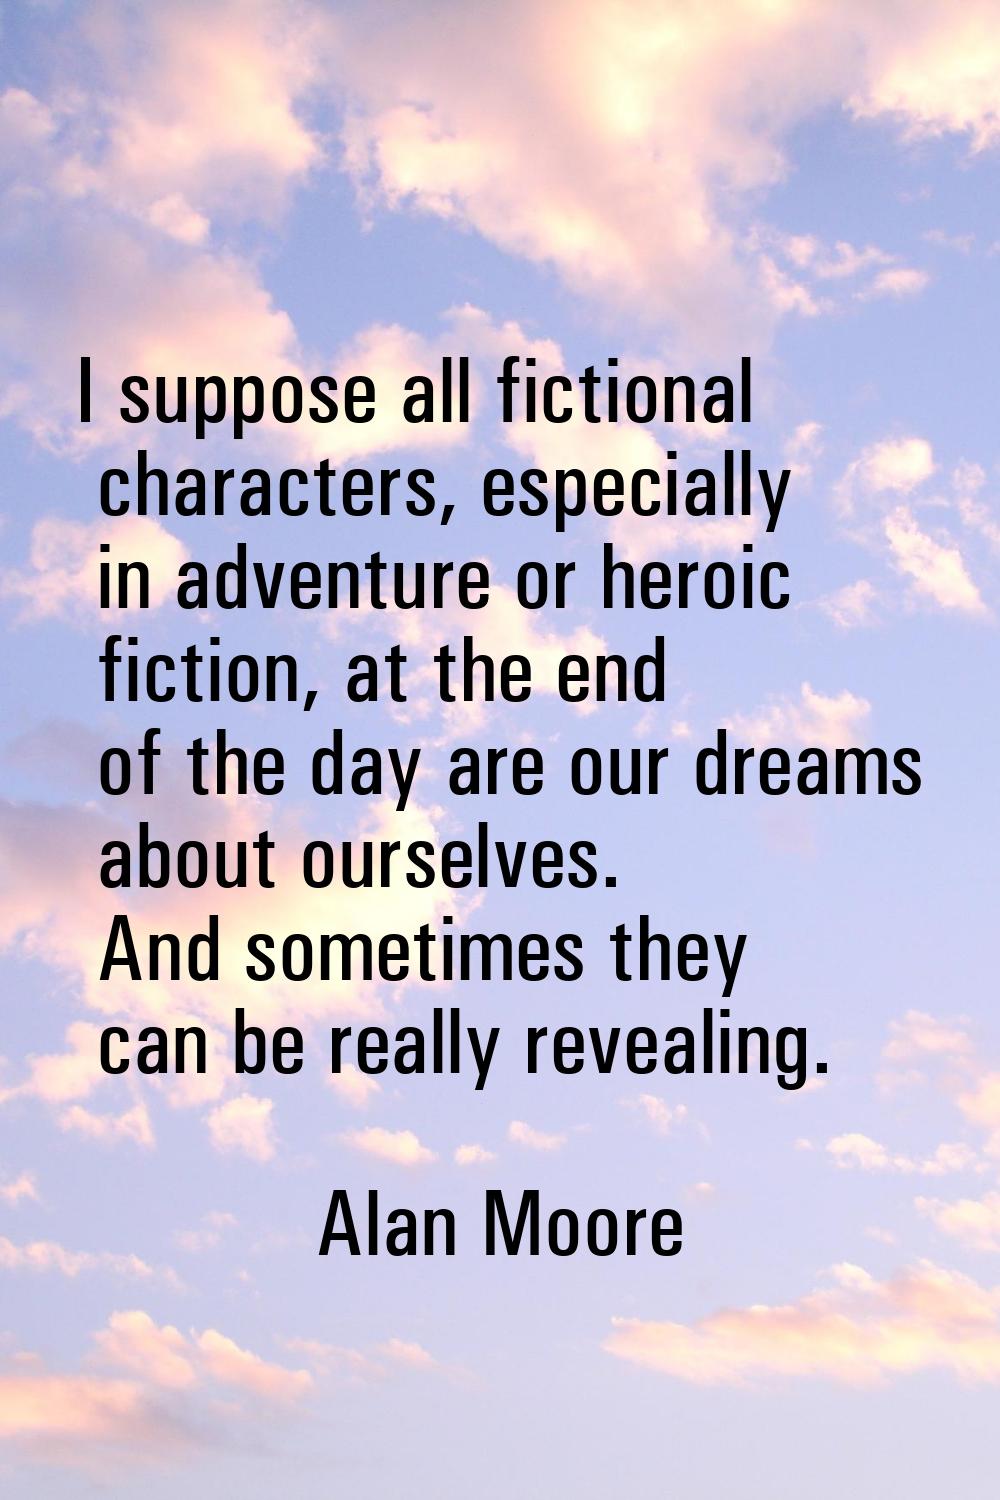 I suppose all fictional characters, especially in adventure or heroic fiction, at the end of the da